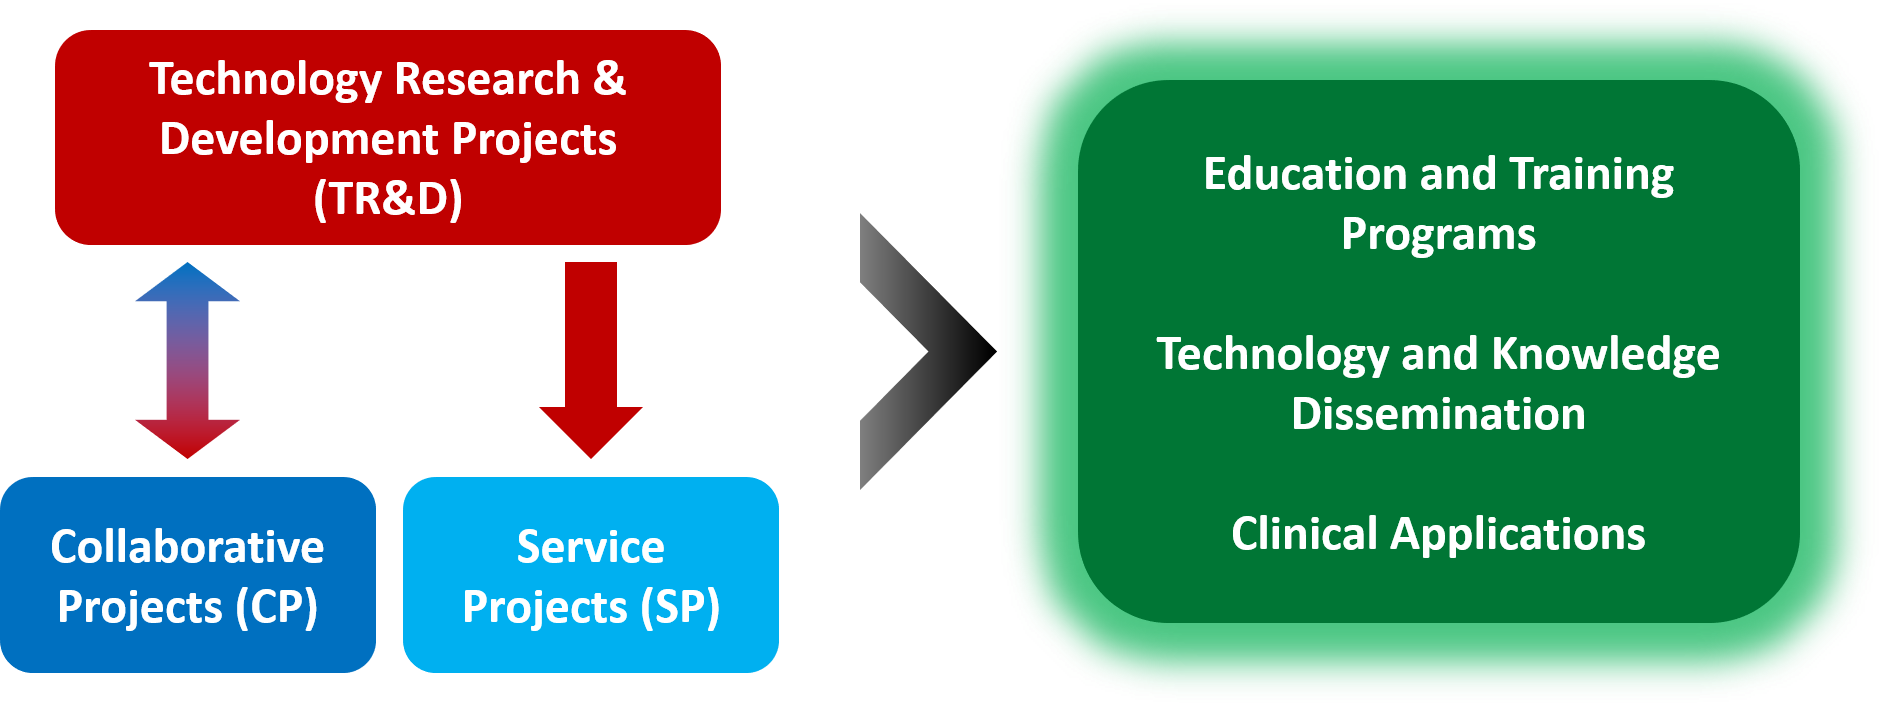 Overview of Education and Training